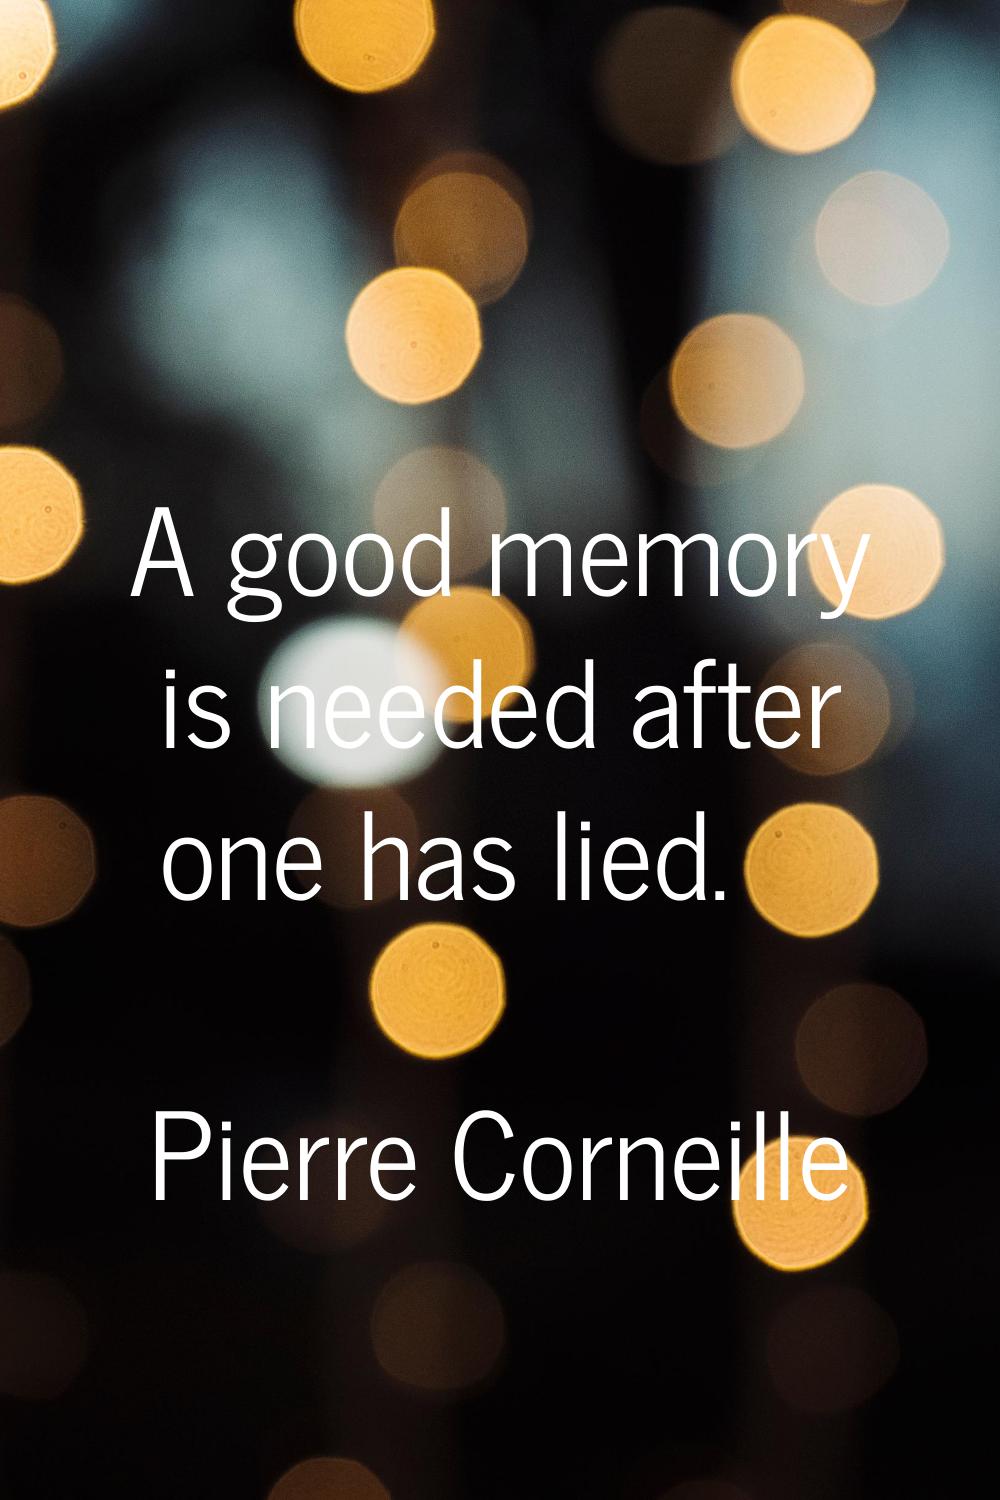 A good memory is needed after one has lied.